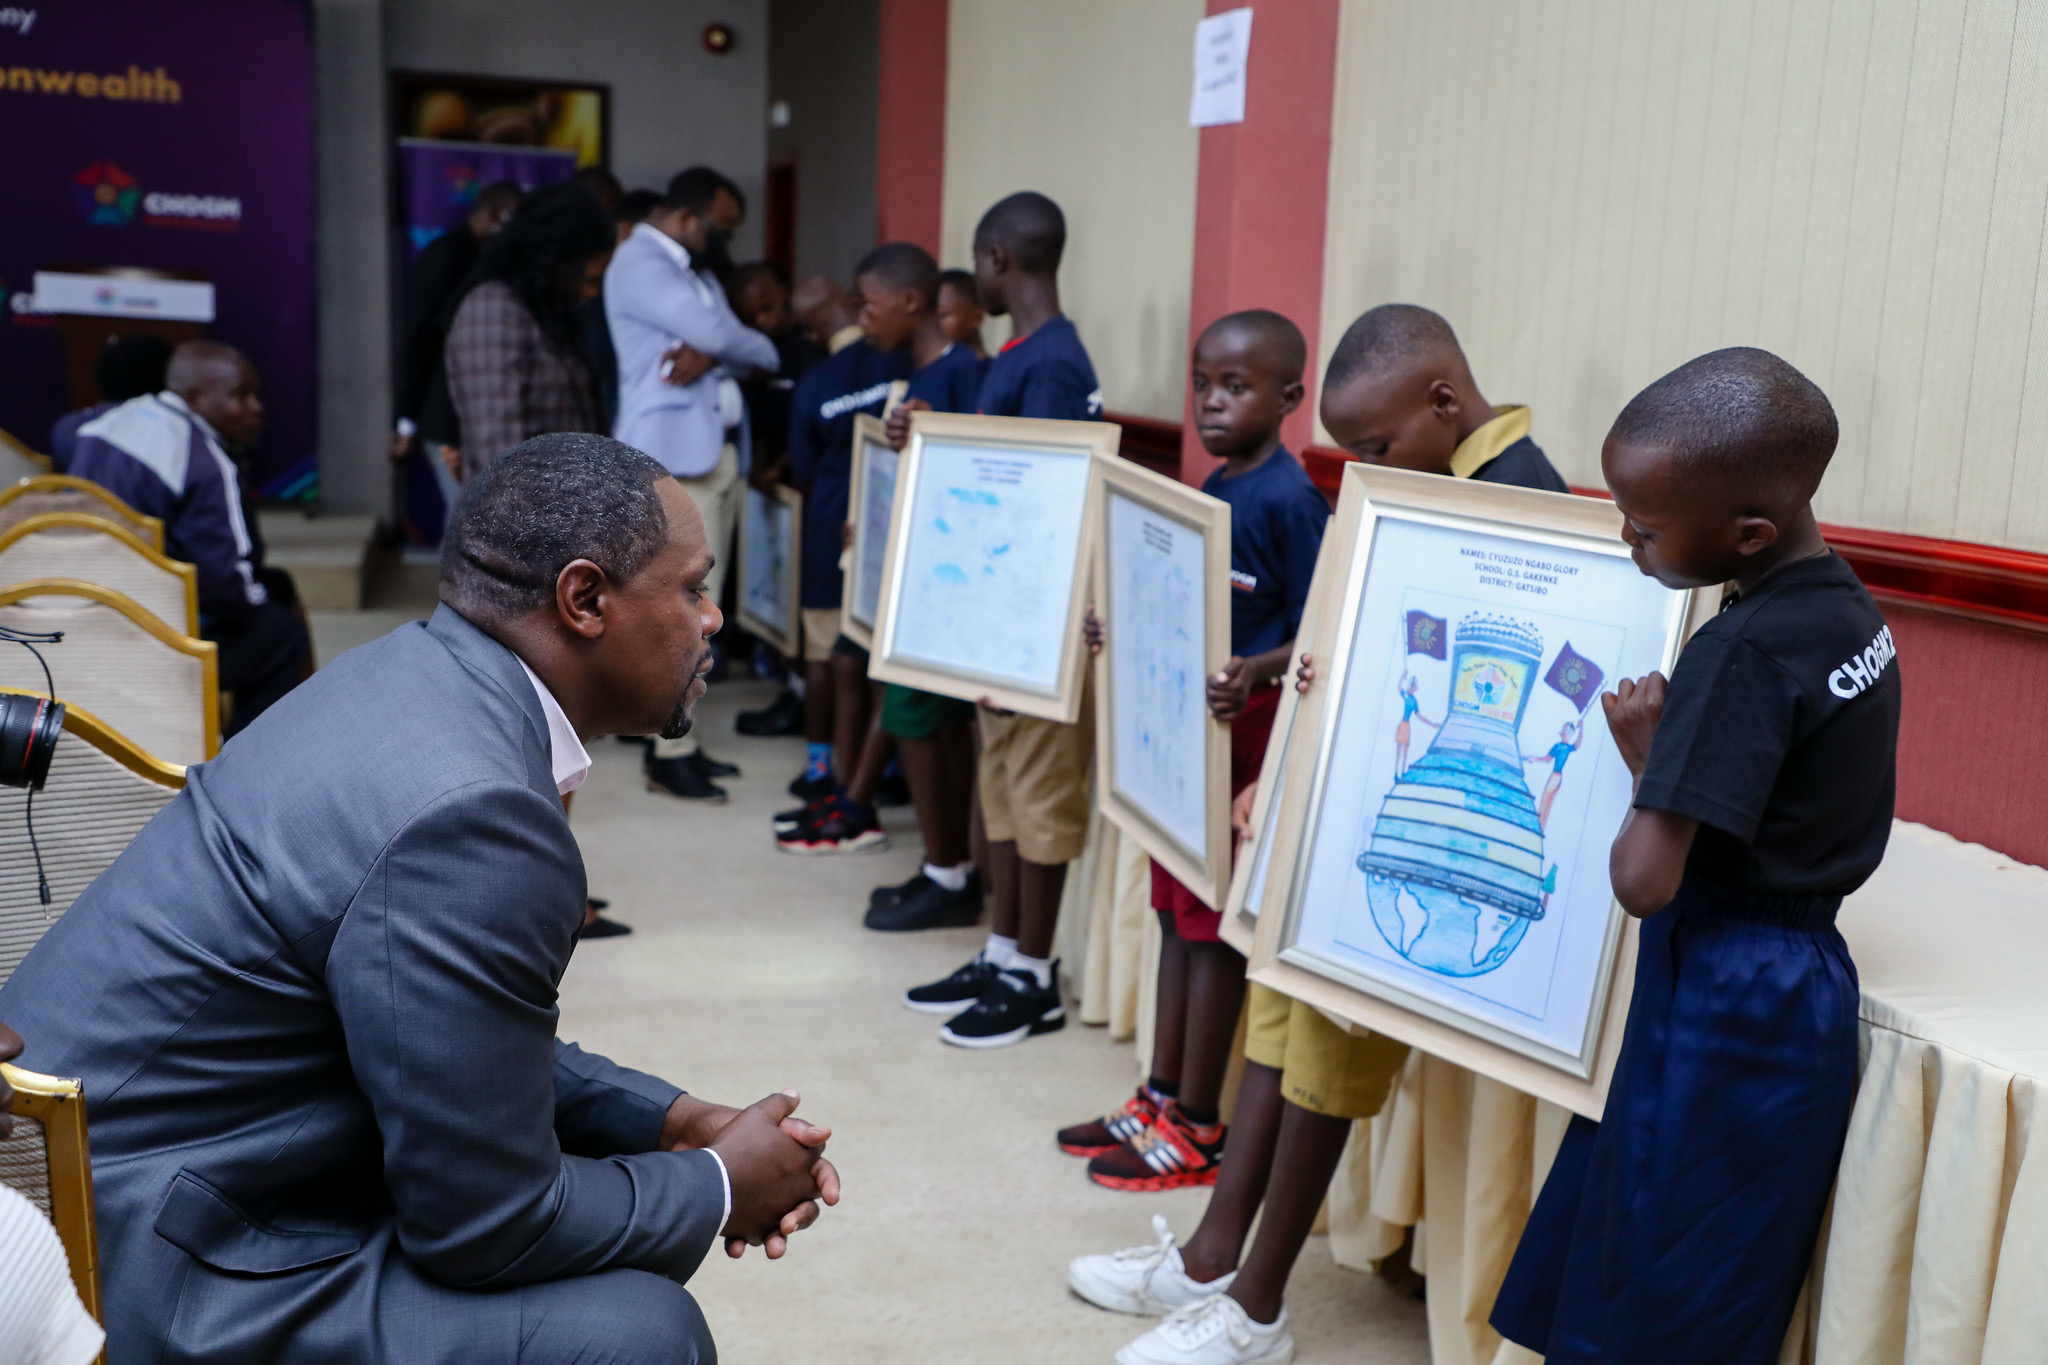 All the finalists were awarded by the Ministry of Education for their outstanding drawings on their understanding of the Commonwealth. Photos by Dan Nsengiyumva